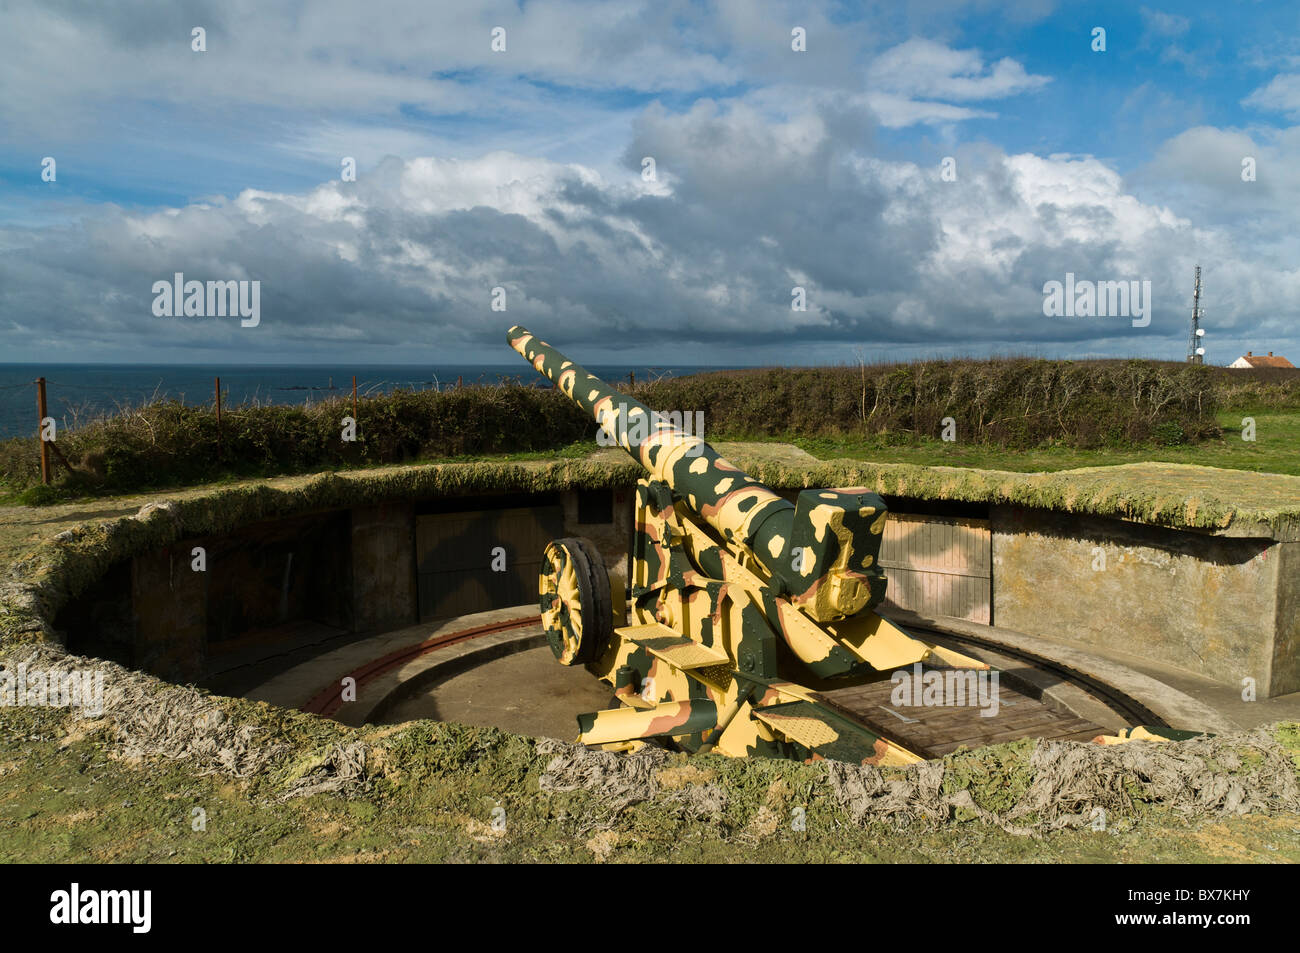 dh Pleinmont TORTEVAL GUERNSEY seconda guerra mondiale pistola navale tedesca empplacement Hitlers Atlantic Wall canale isole cannoniere occupazione isola Foto Stock